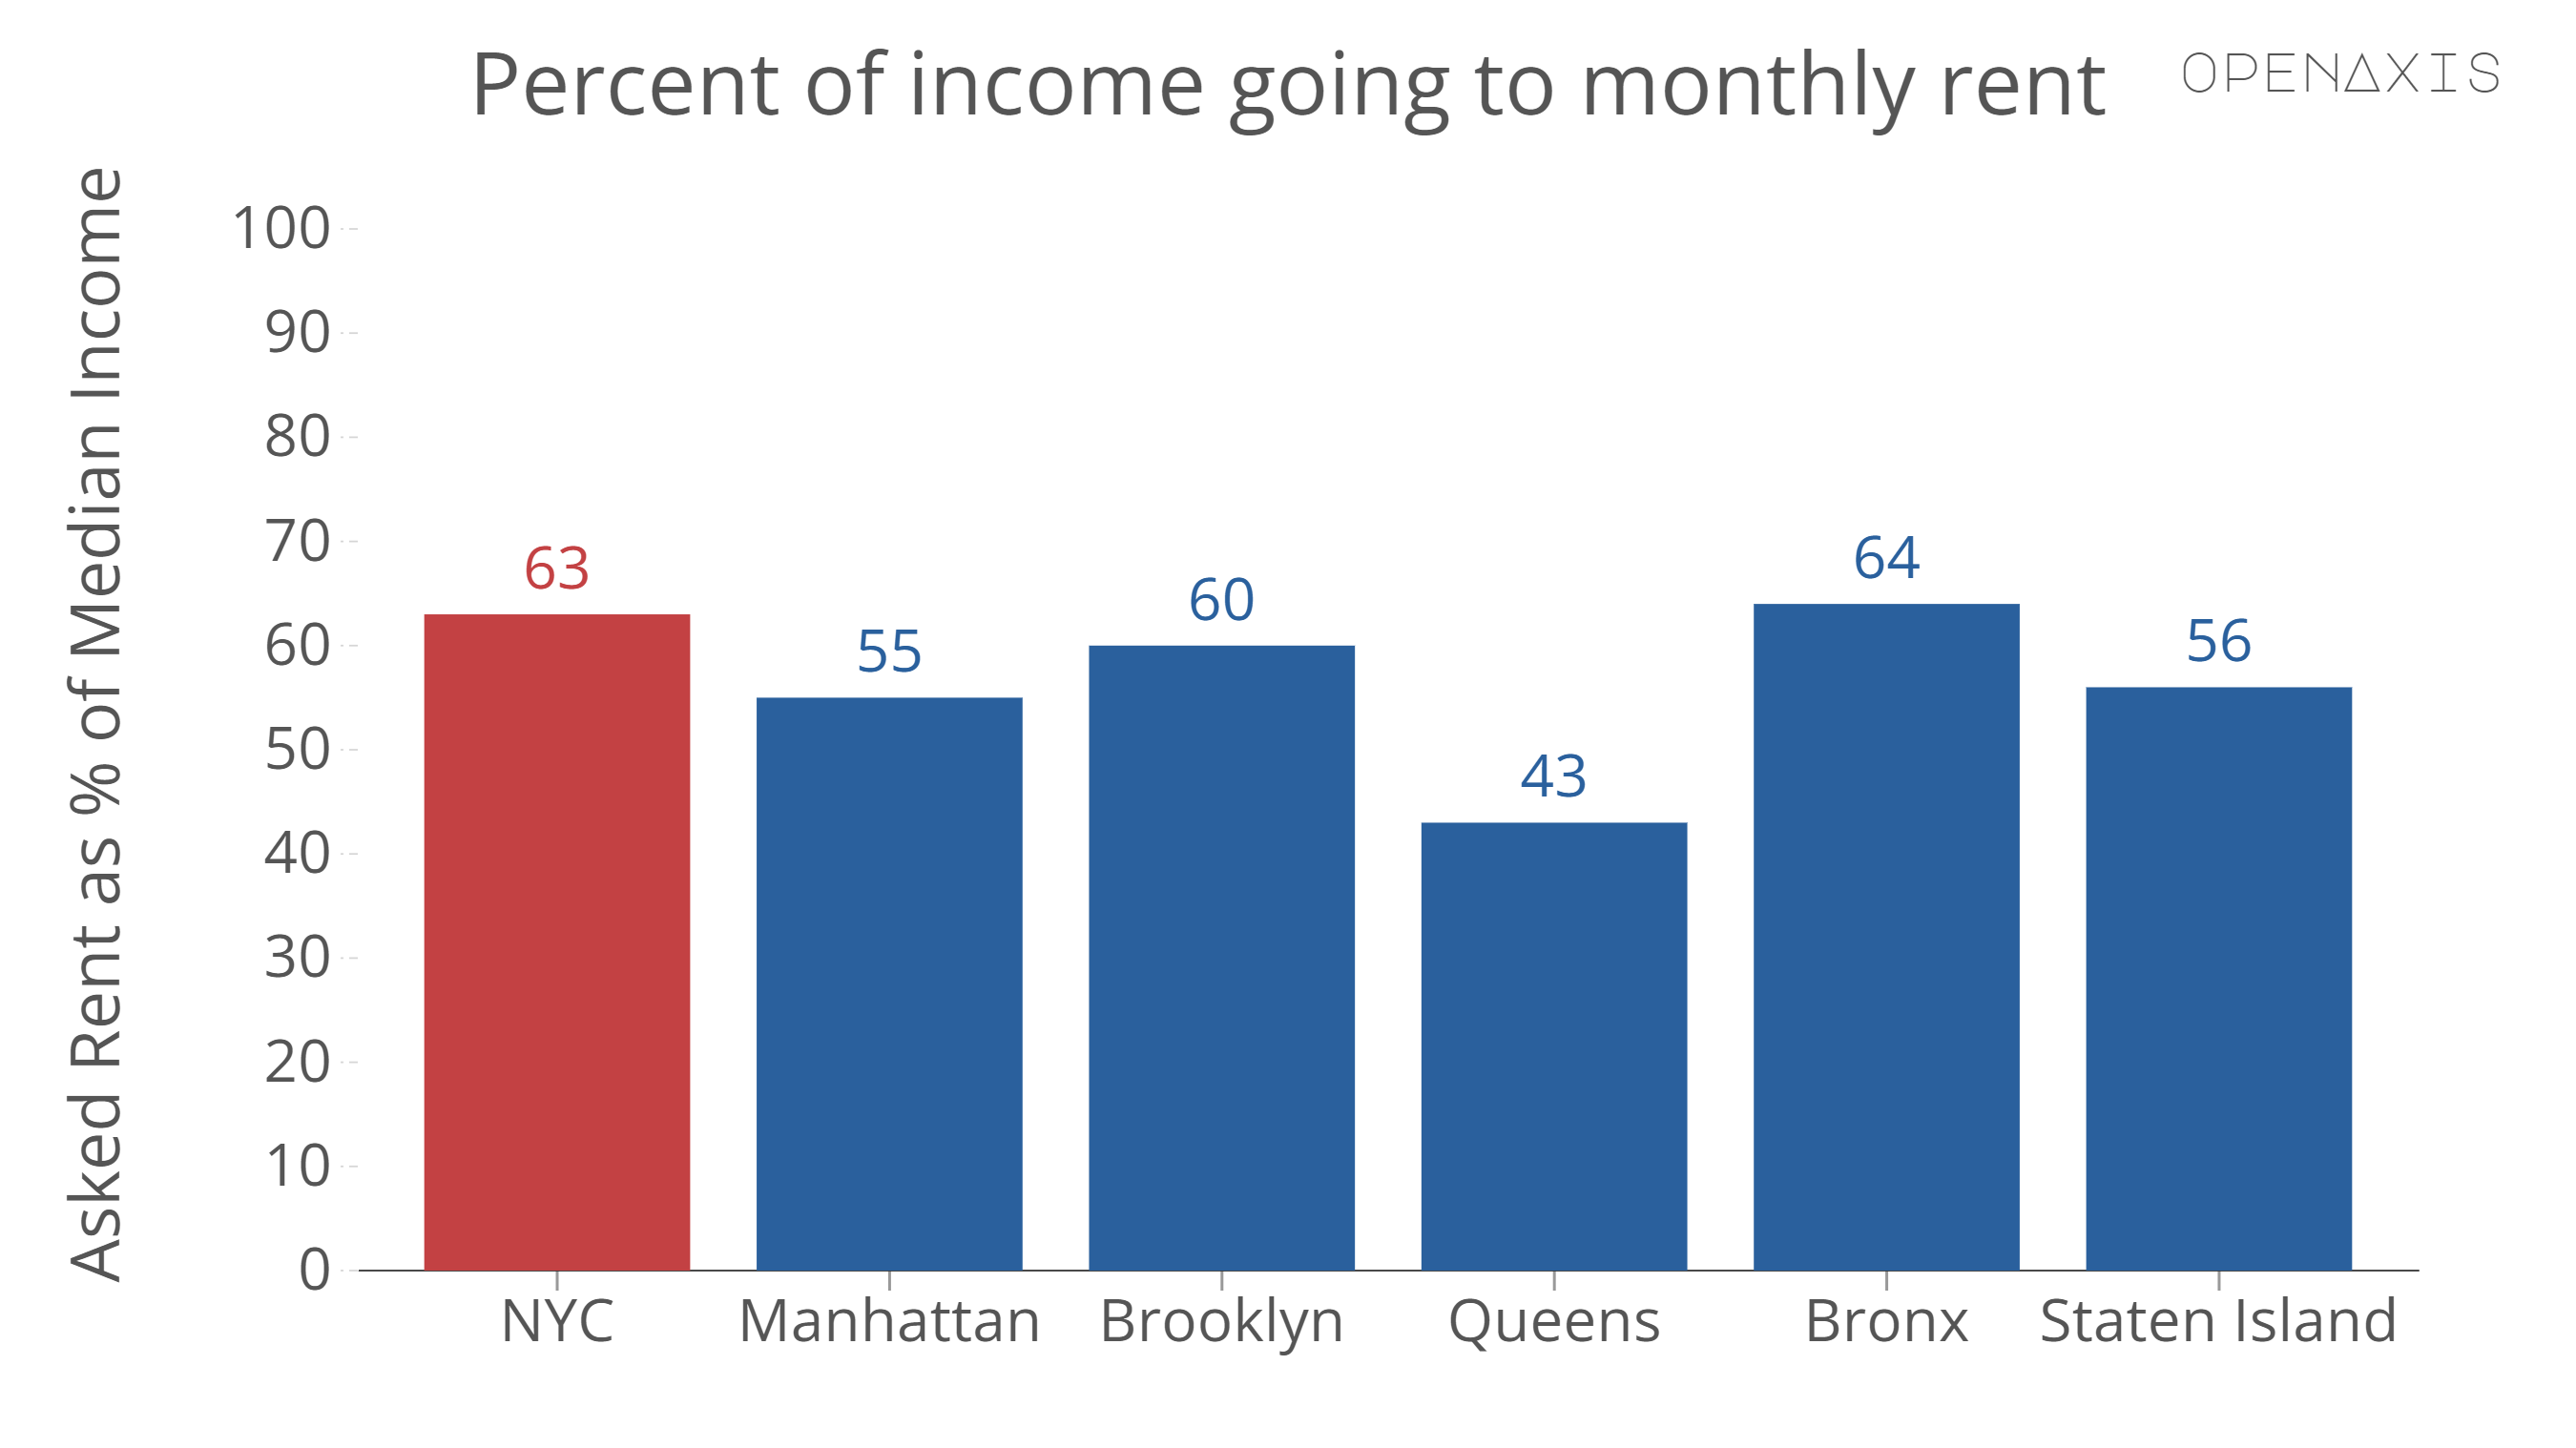 "Percent of income going to monthly rent"